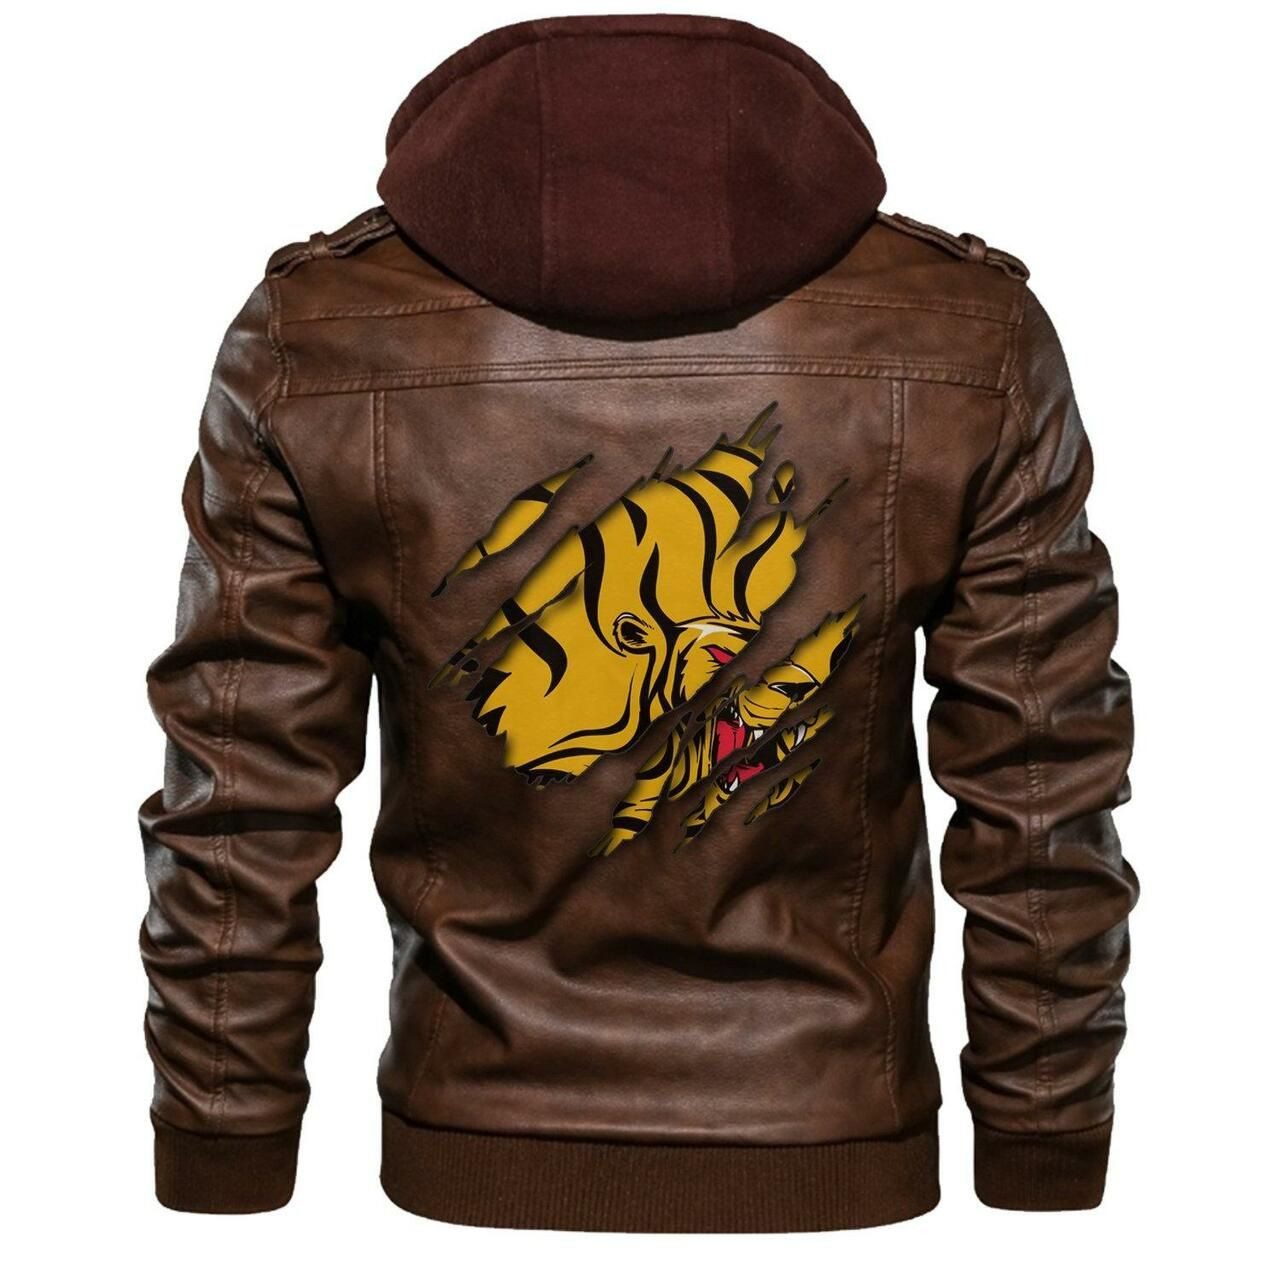 Searching for a new jacket to add to your wardrobe 251